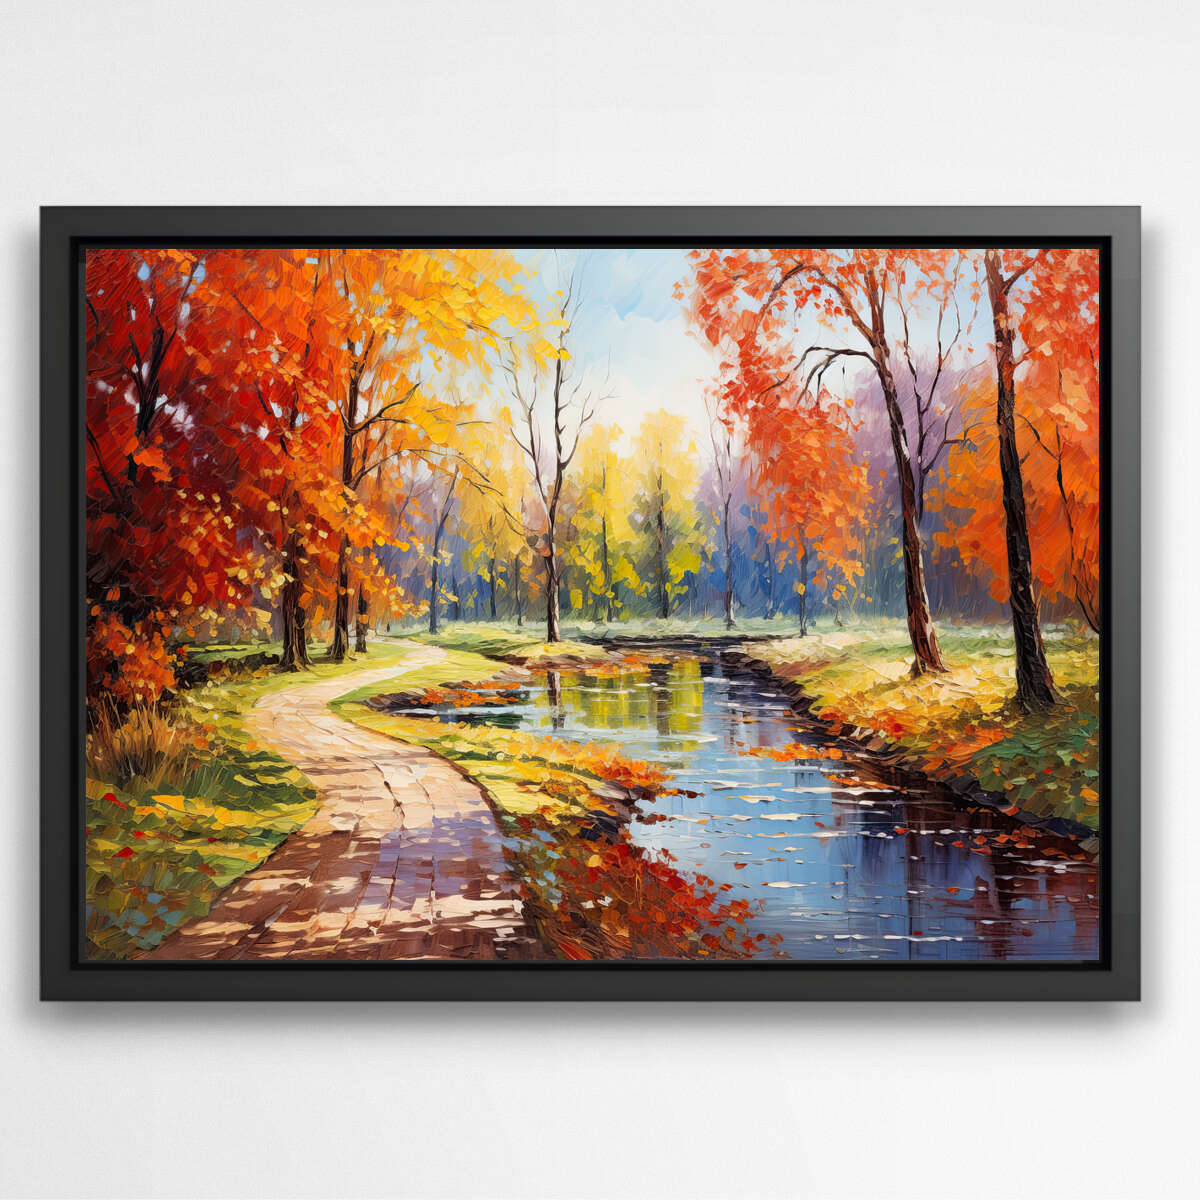 Nature's Solice | Nature Wall Art Prints - The Canvas Hive